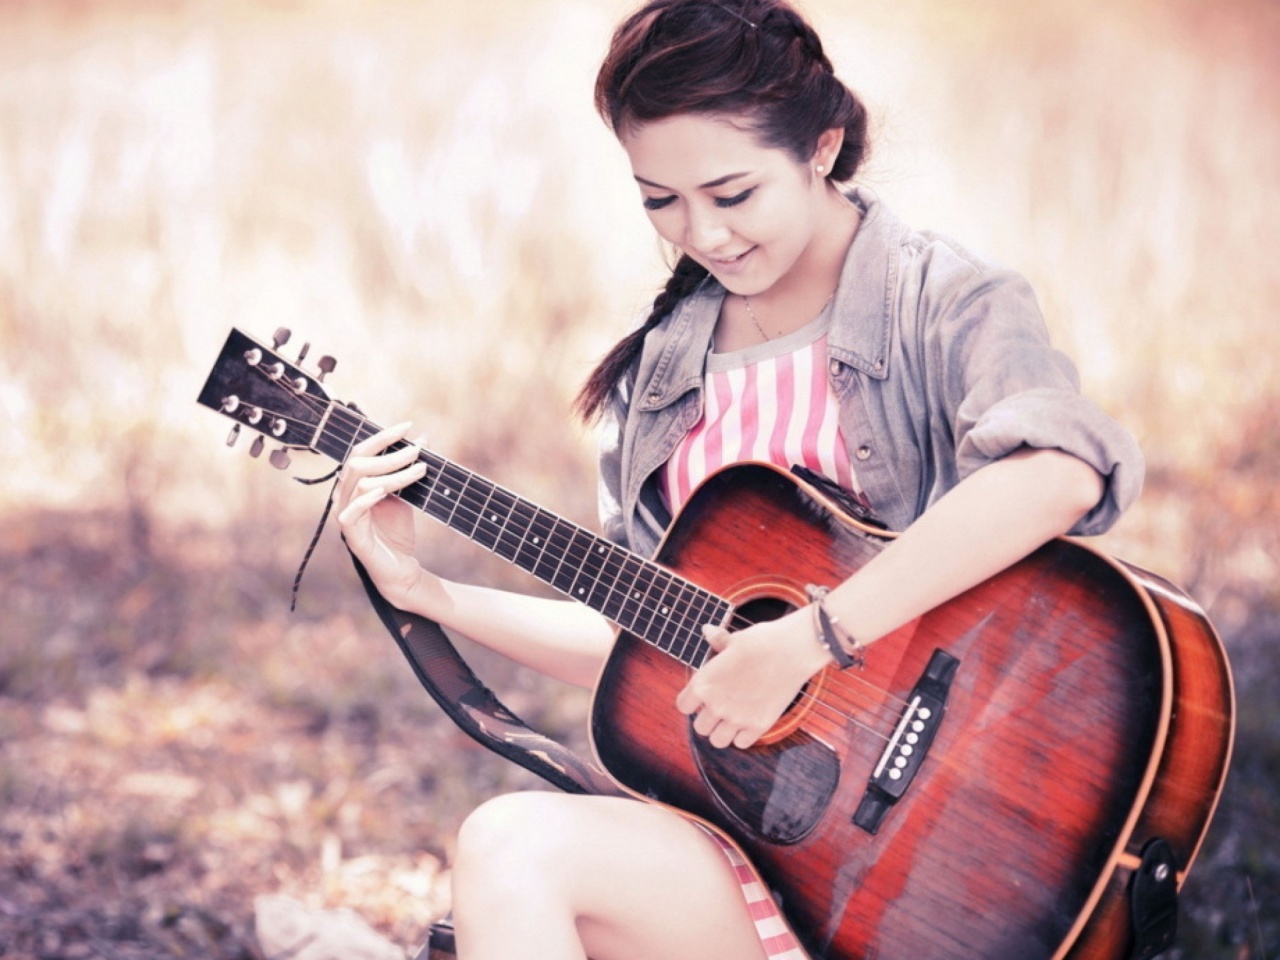 Chinese girl with guitar wallpaper 1280x960